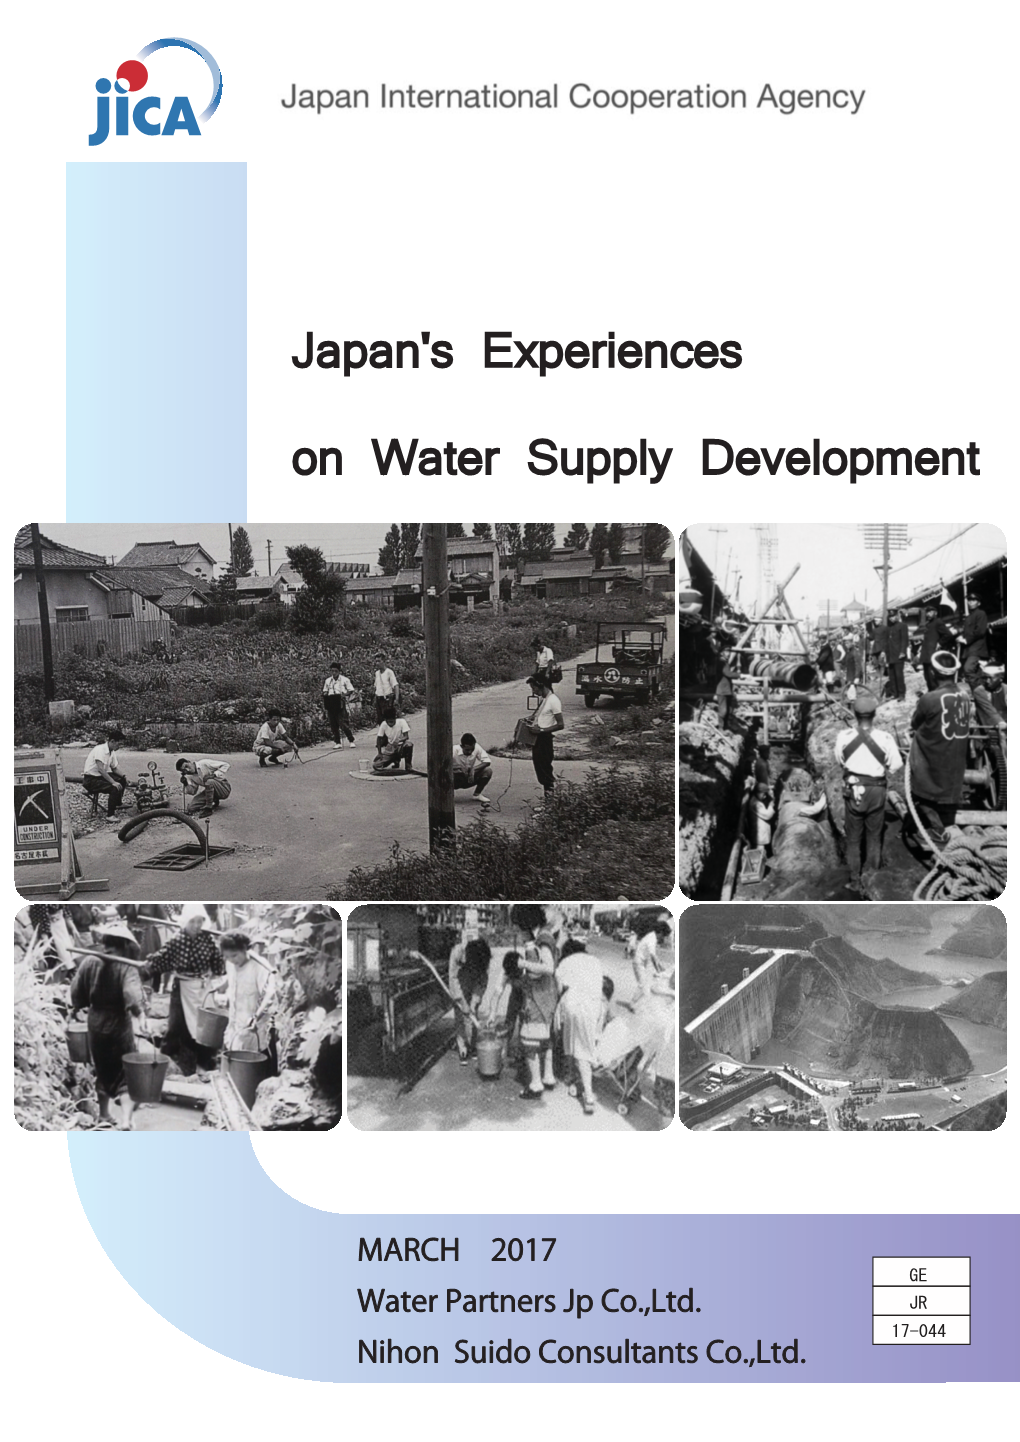 Japan's Experiences on Water Supply Development